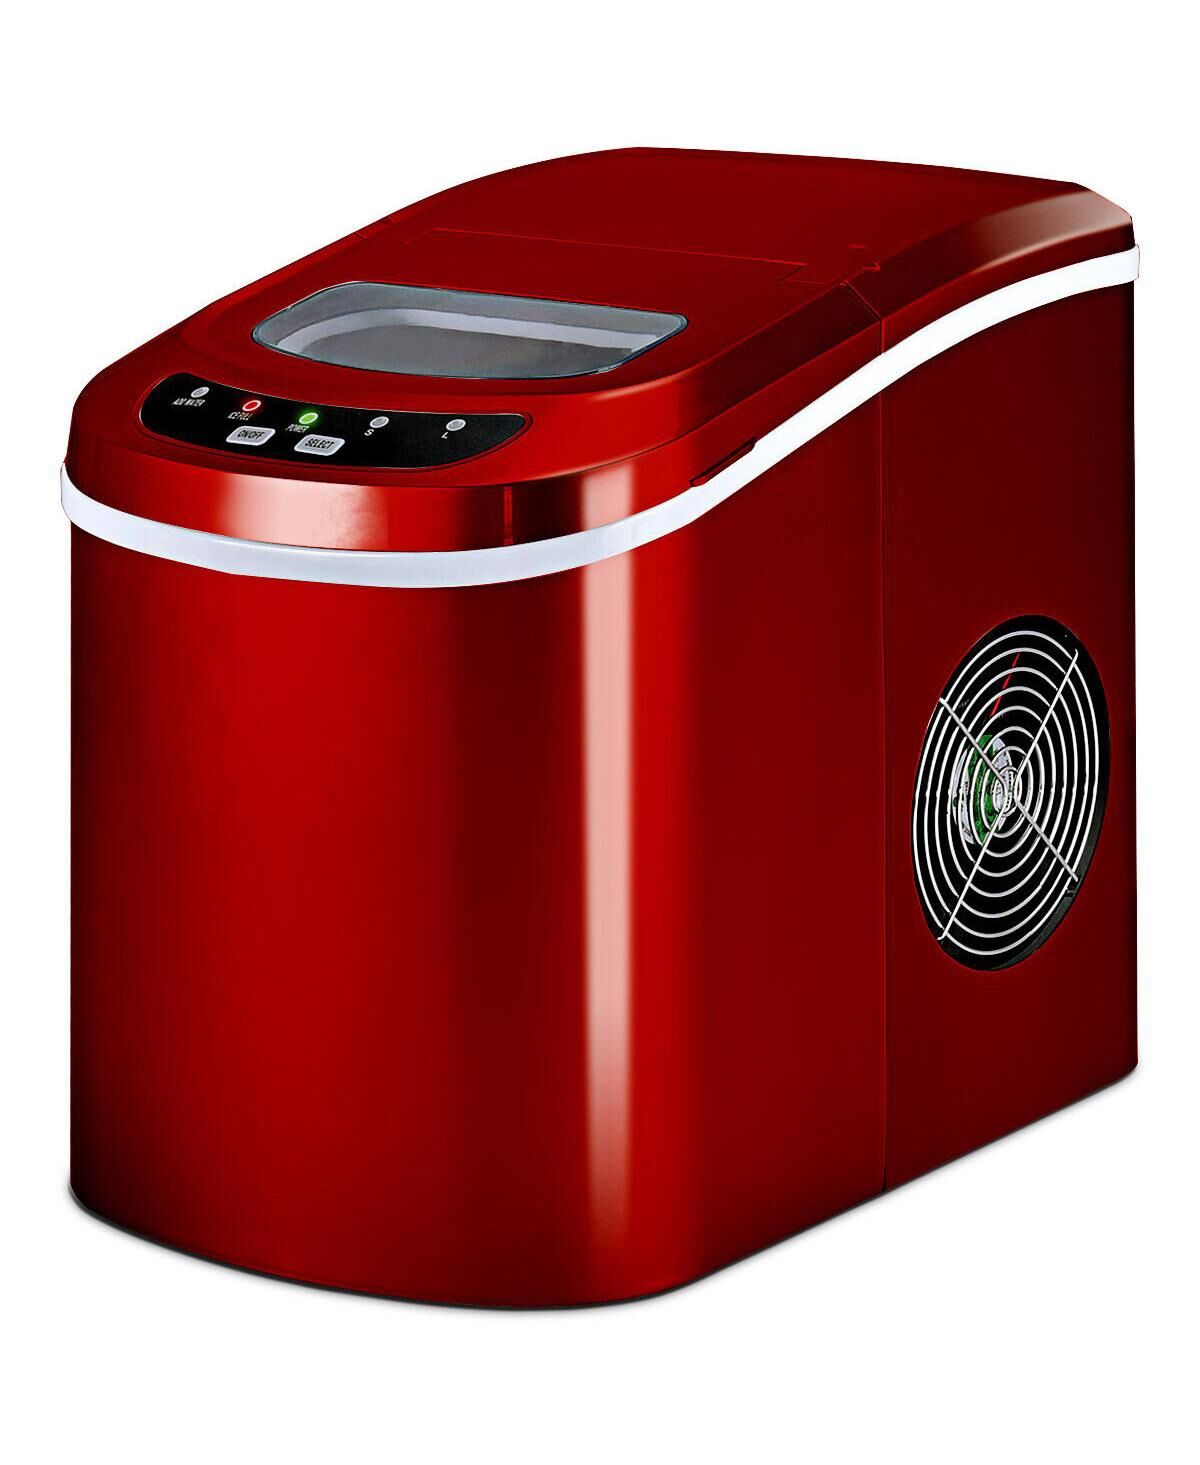 Costway Portable Compact Electric Ice Maker Machine Mini Cube - Red